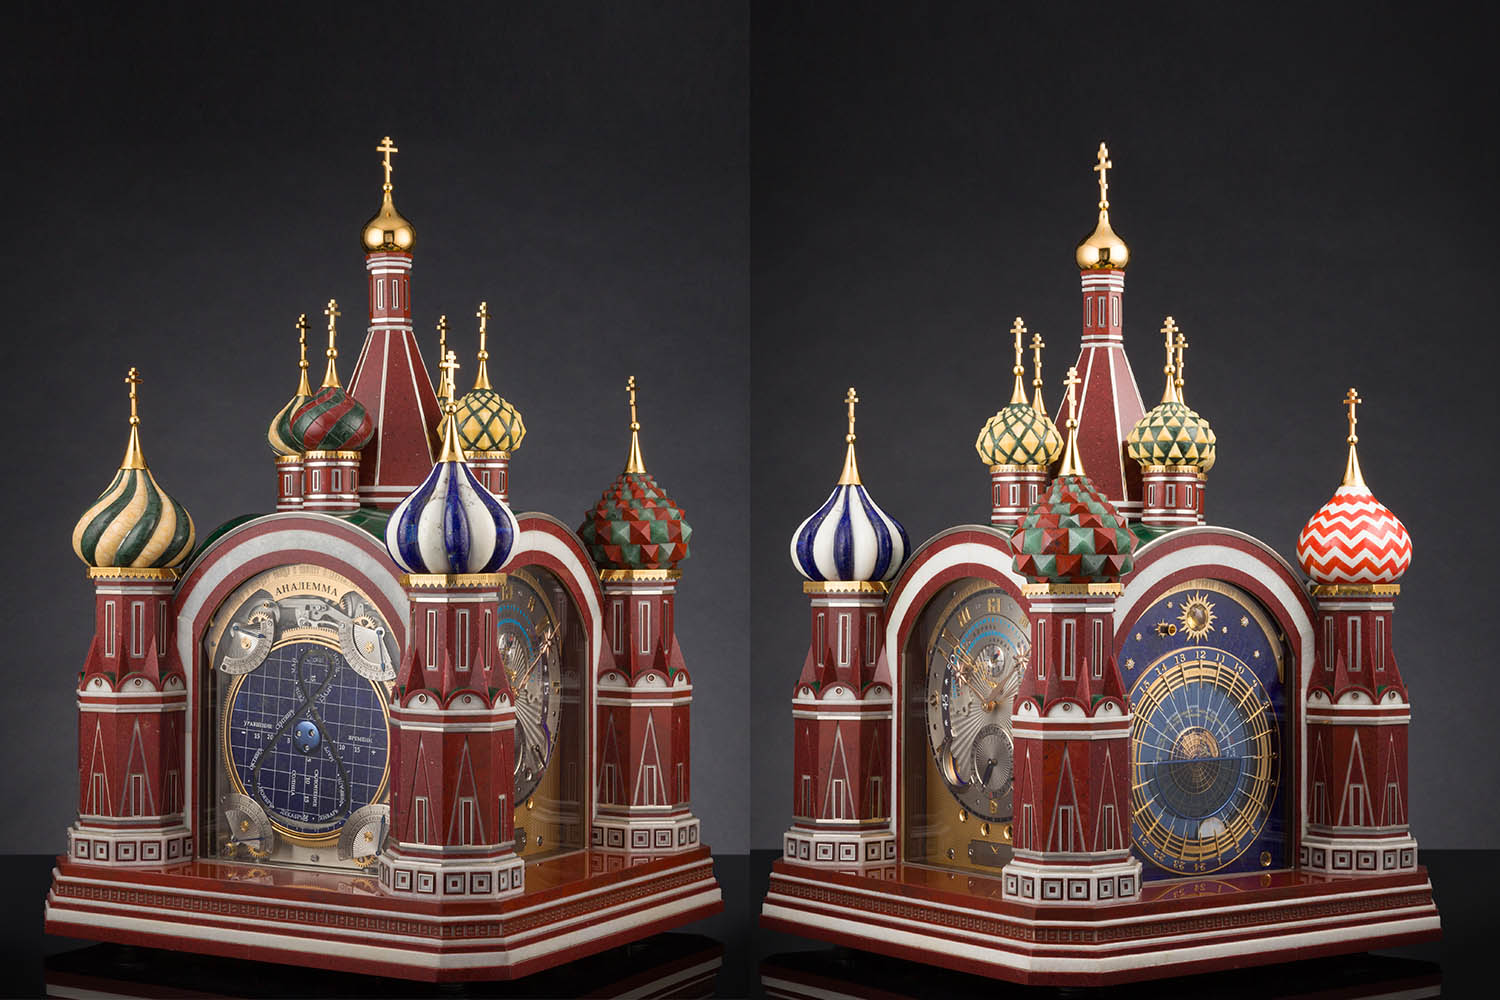 konstantin-chaykin-moscow-comptus-easter-clock-most-complicated-clock-ever-made-in-russia-4